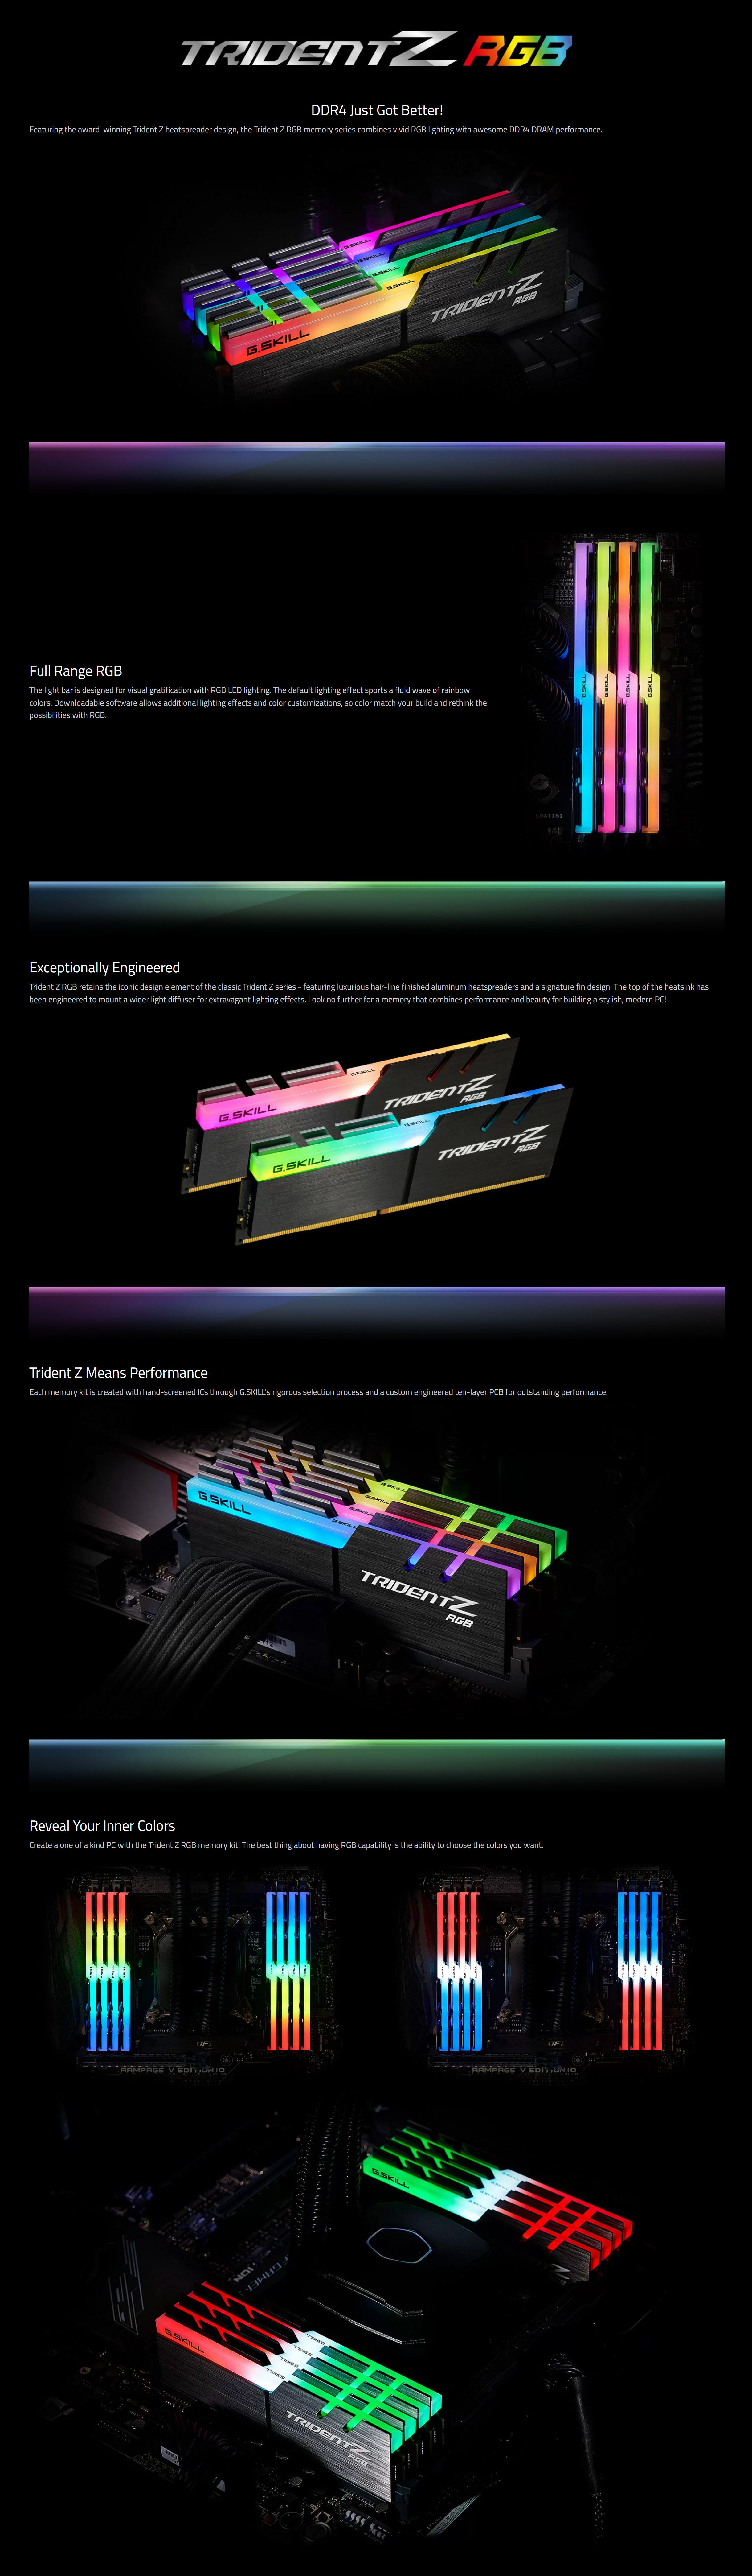 A large marketing image providing additional information about the product G.Skill 16GB Kit (2x8GB) DDR4 Trident Z RGB C18 4000MHz - Black - Additional alt info not provided